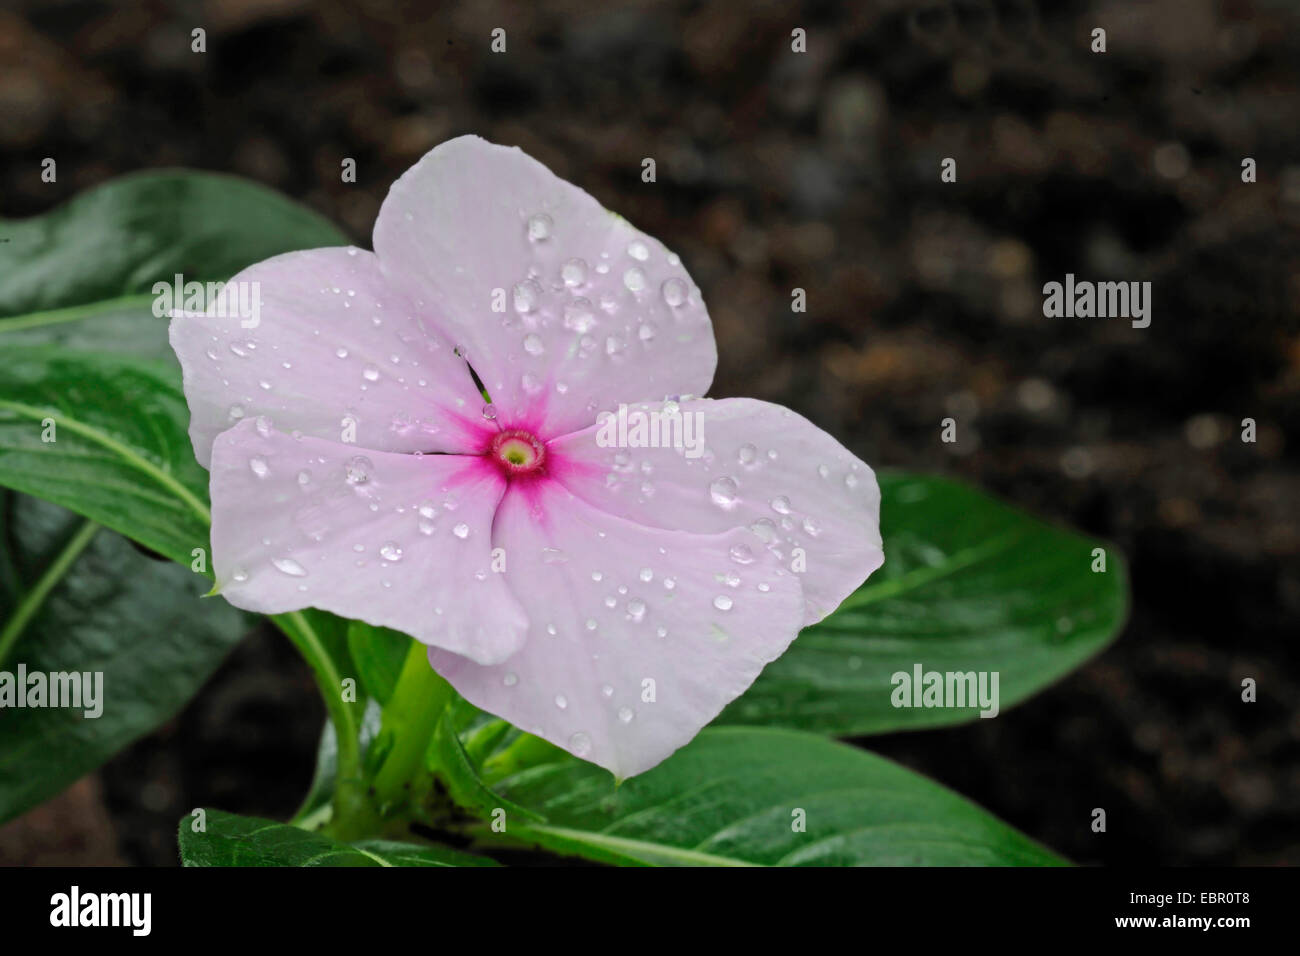 Rose periwinkle, common periwinkle, Madagascar periwinkle (Catharanthus roseus, Vinca rosea), flower with water drops Stock Photo